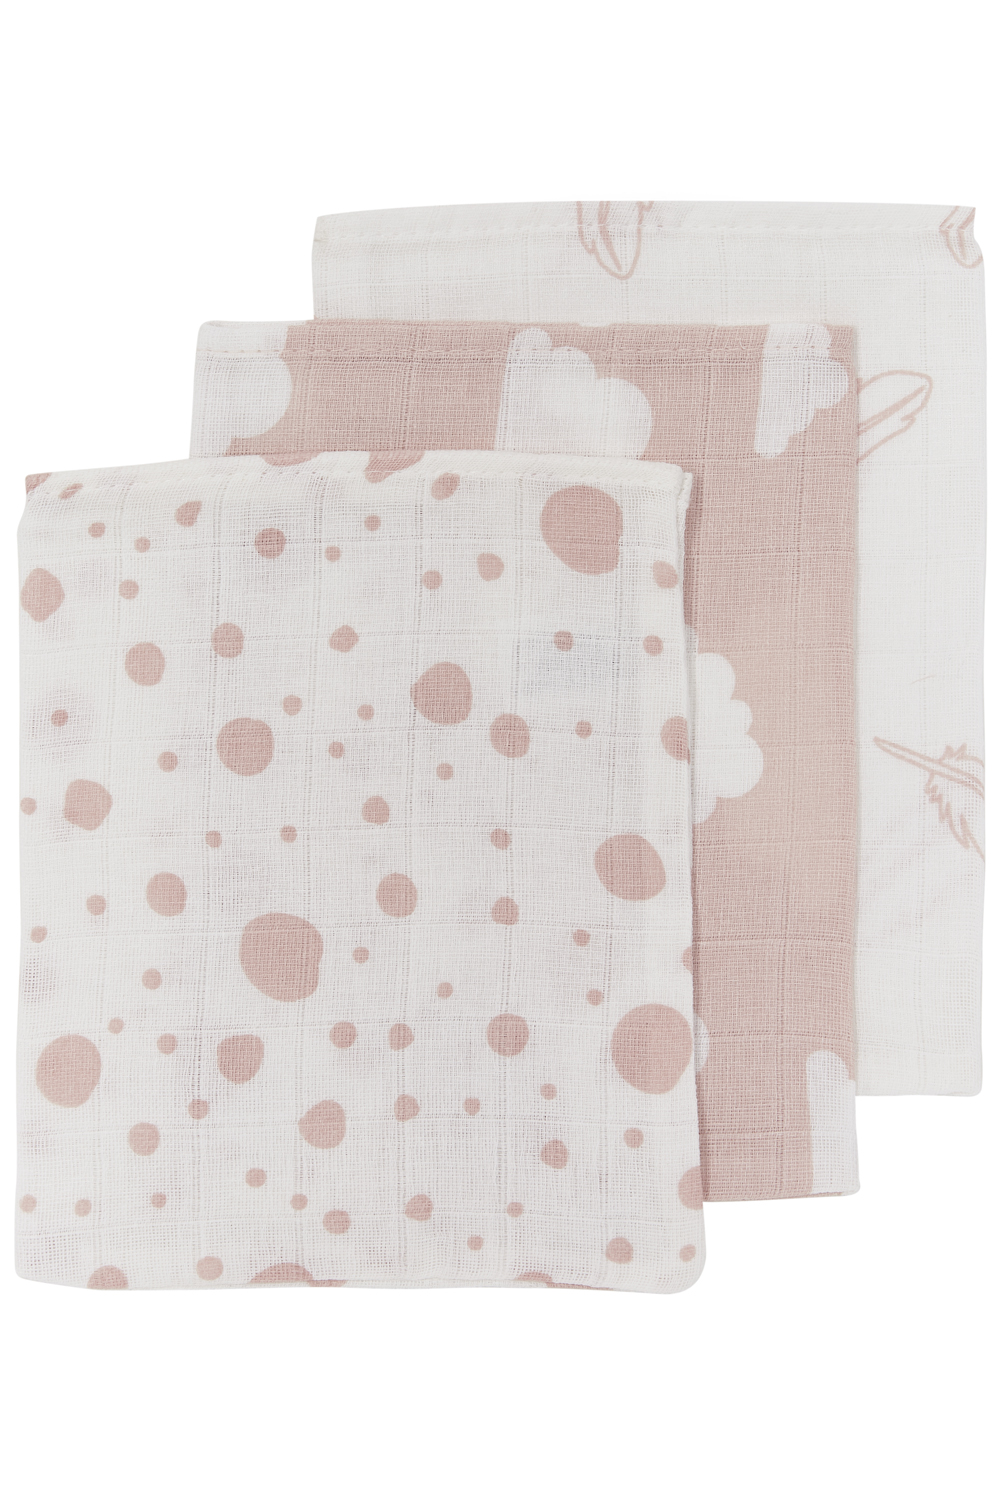 Muslin Wash Mitts 3-Pack Feathers-Clouds-Dots - Pink/White - 20X17cm